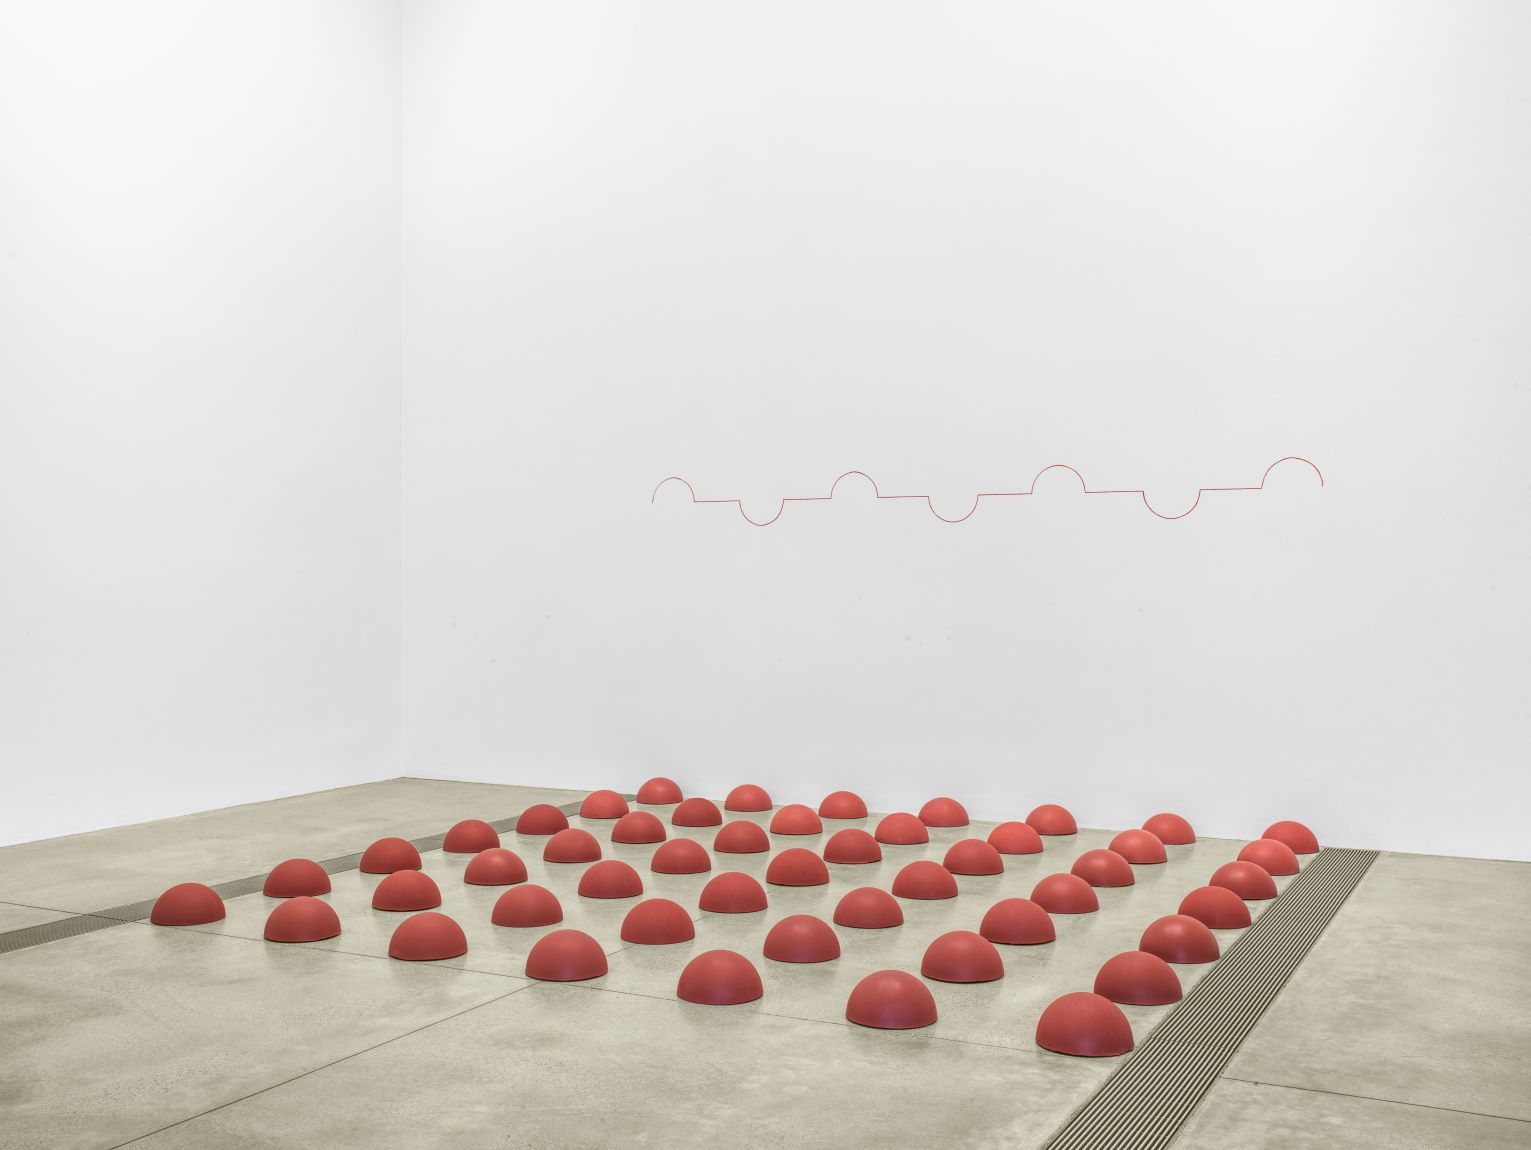 Several small red sculptures in the shape of little mounds laying on the concrete ground in a grid form with a red line drawn across the wall with several peaks